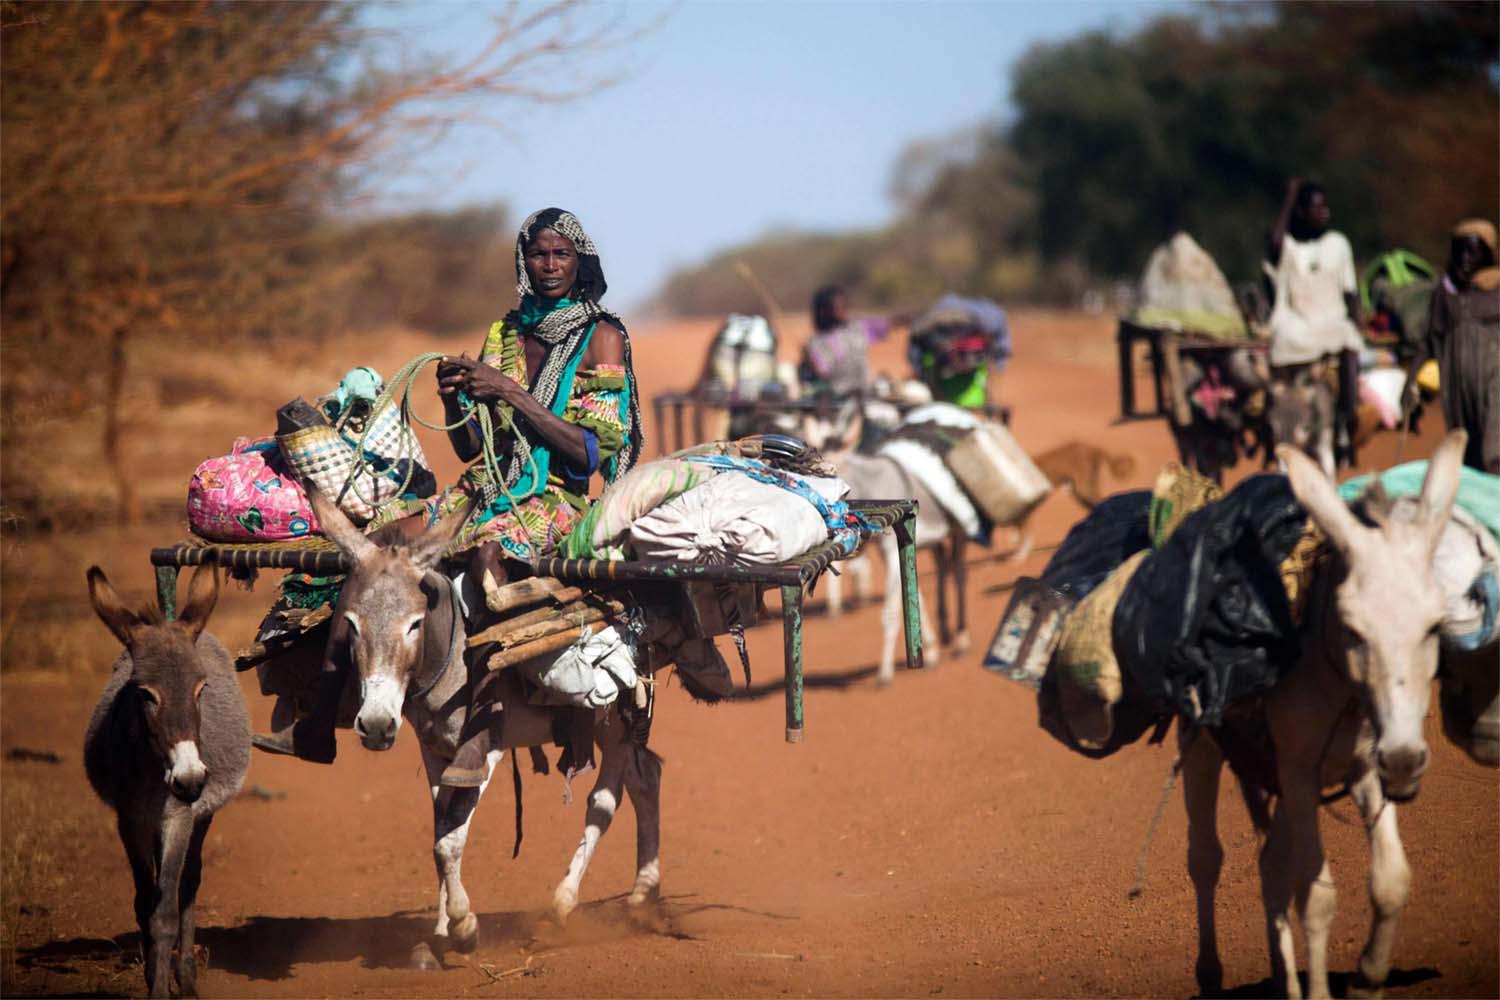 A woman rides a donkey as nomad families from the Misseryia area in Abyei region